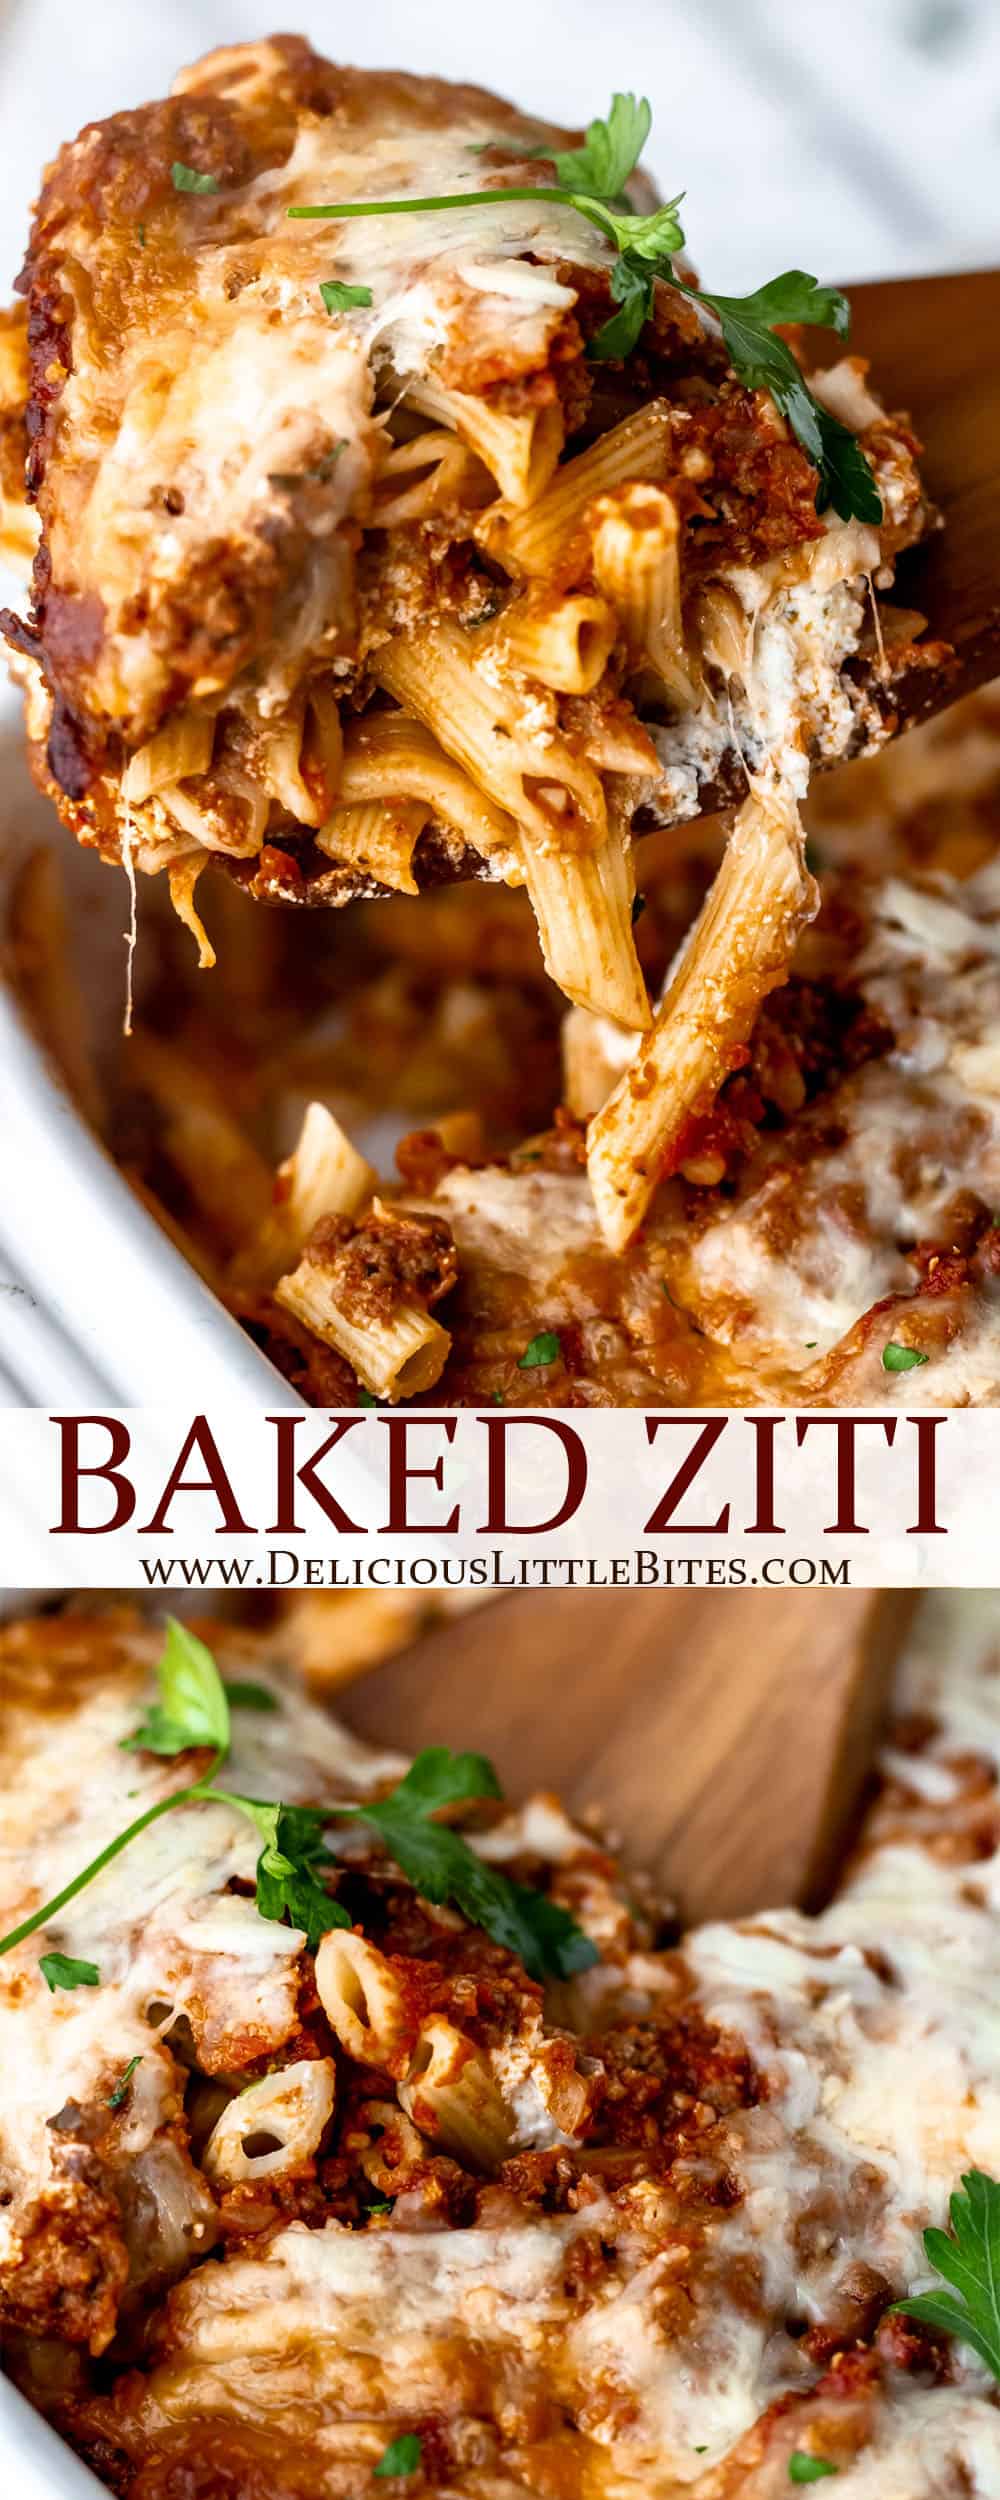 Baked Ziti With Vodka Sauce - Delicious Little Bites